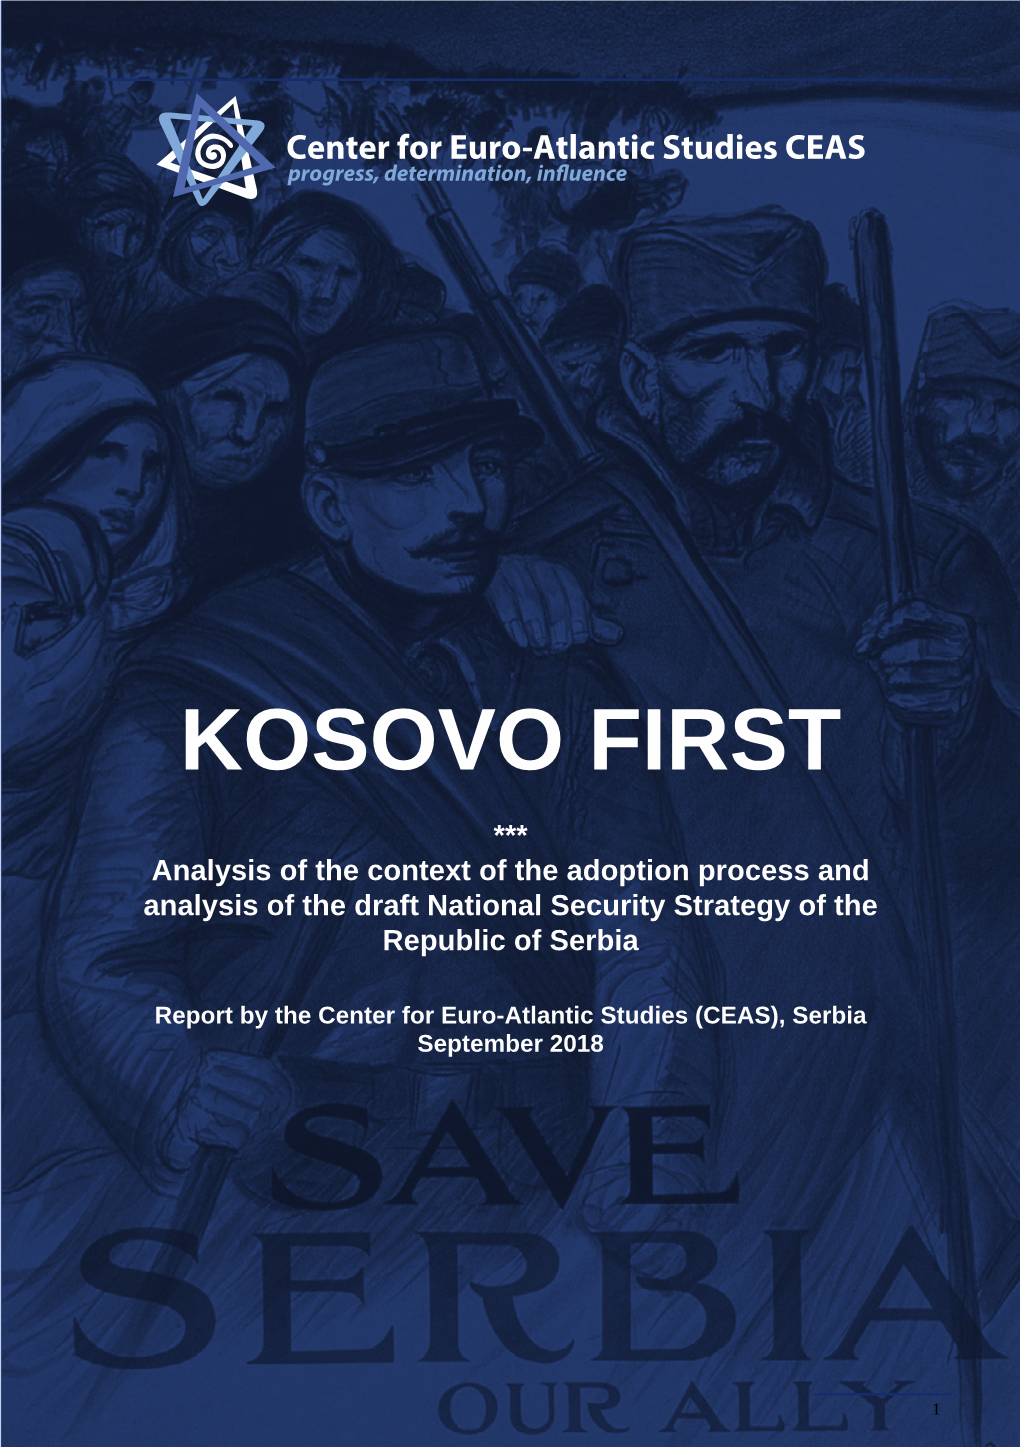 KOSOVO FIRST *** Analysis of the Context of the Adoption Process and Analysis of the Draft National Security Strategy of the Republic of Serbia